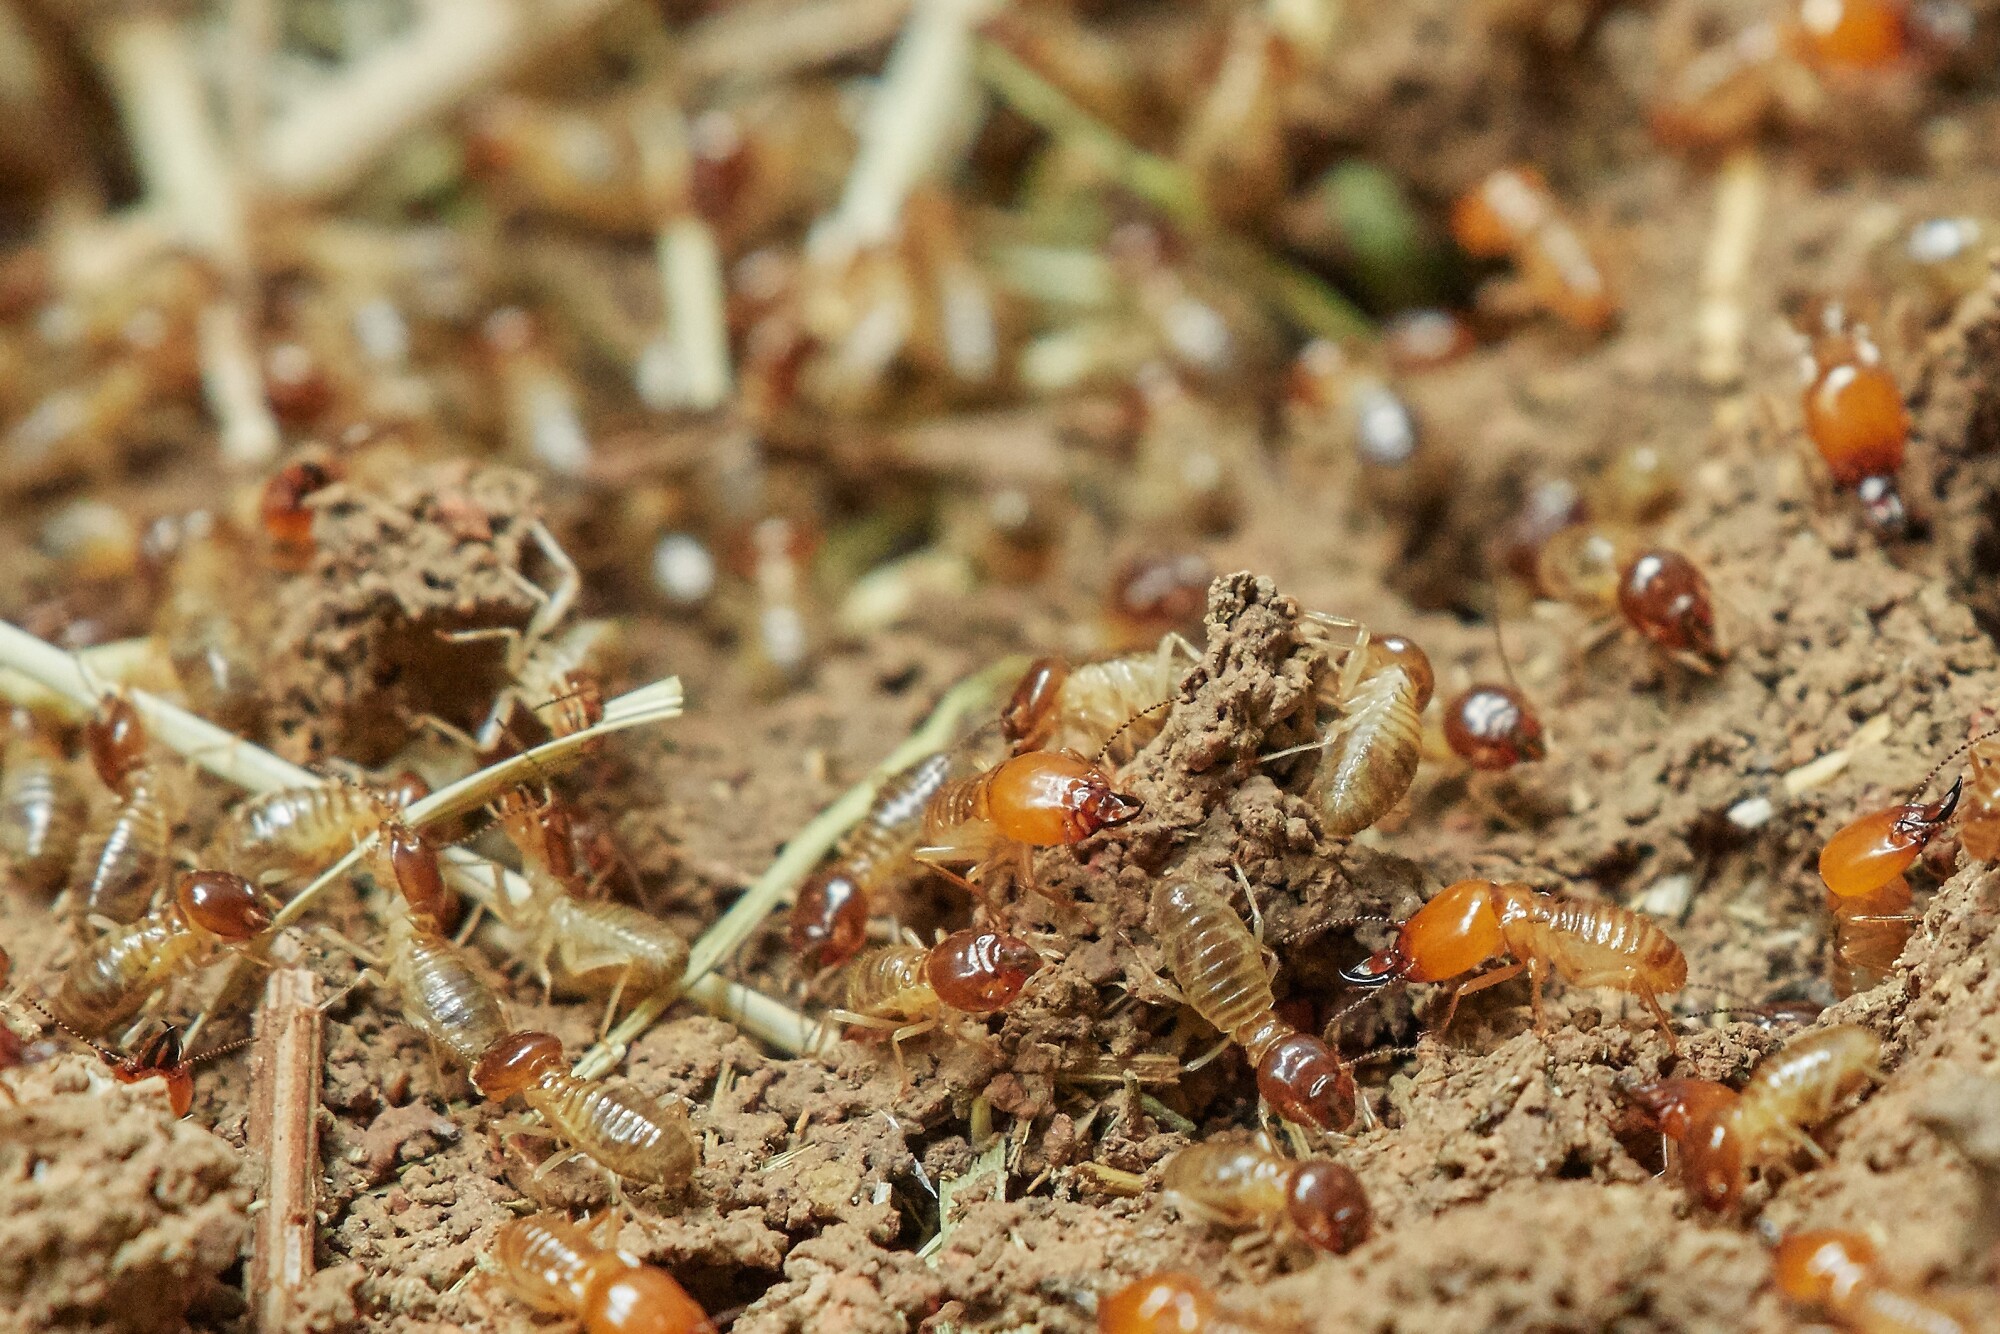 Think you have termites? Click here to explore the warning signs of a termite infestation and what you can do to get rid of these uninvited pests.